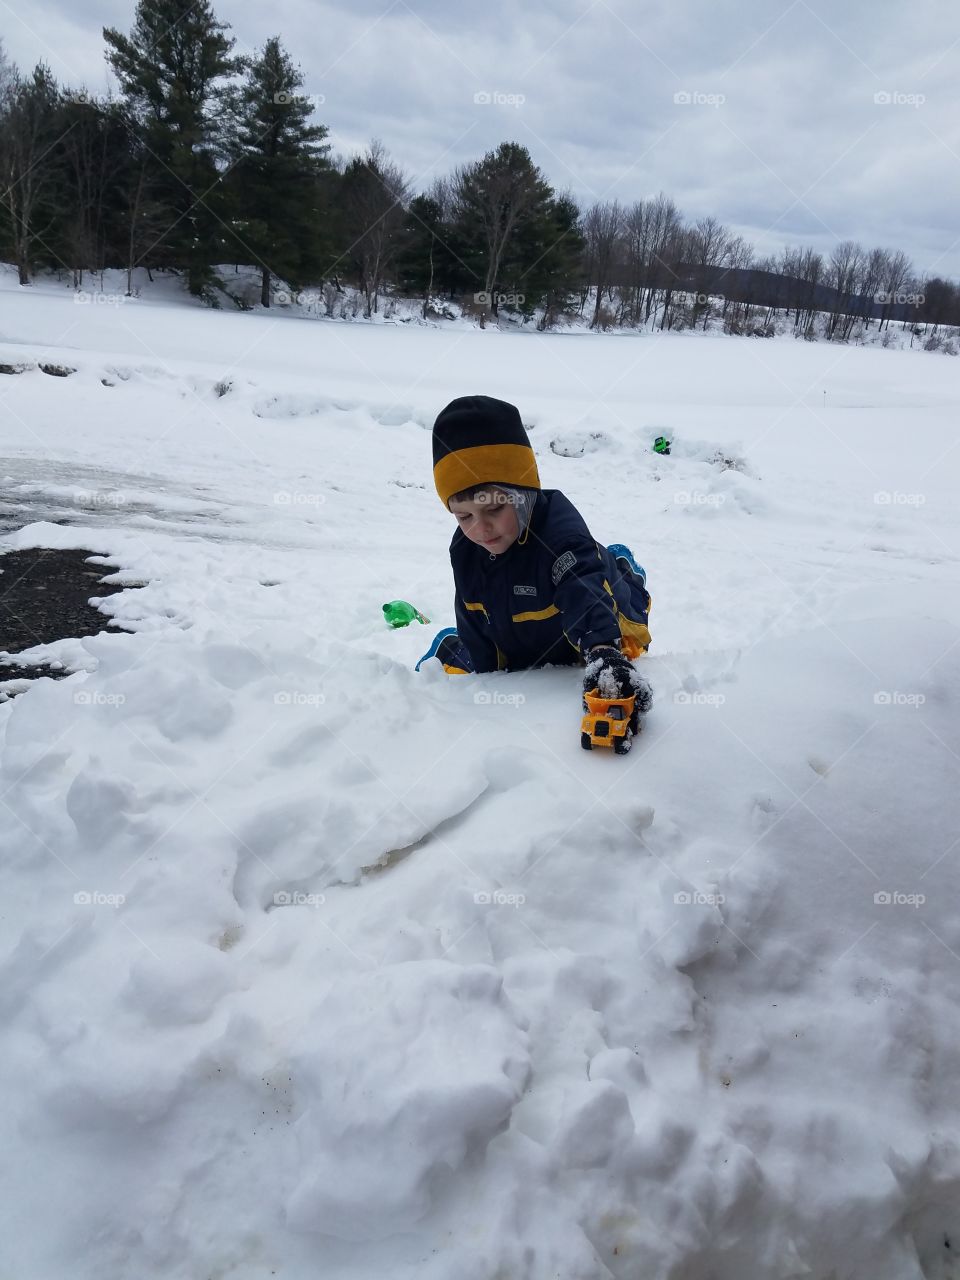 playing I. 
playing in the snow